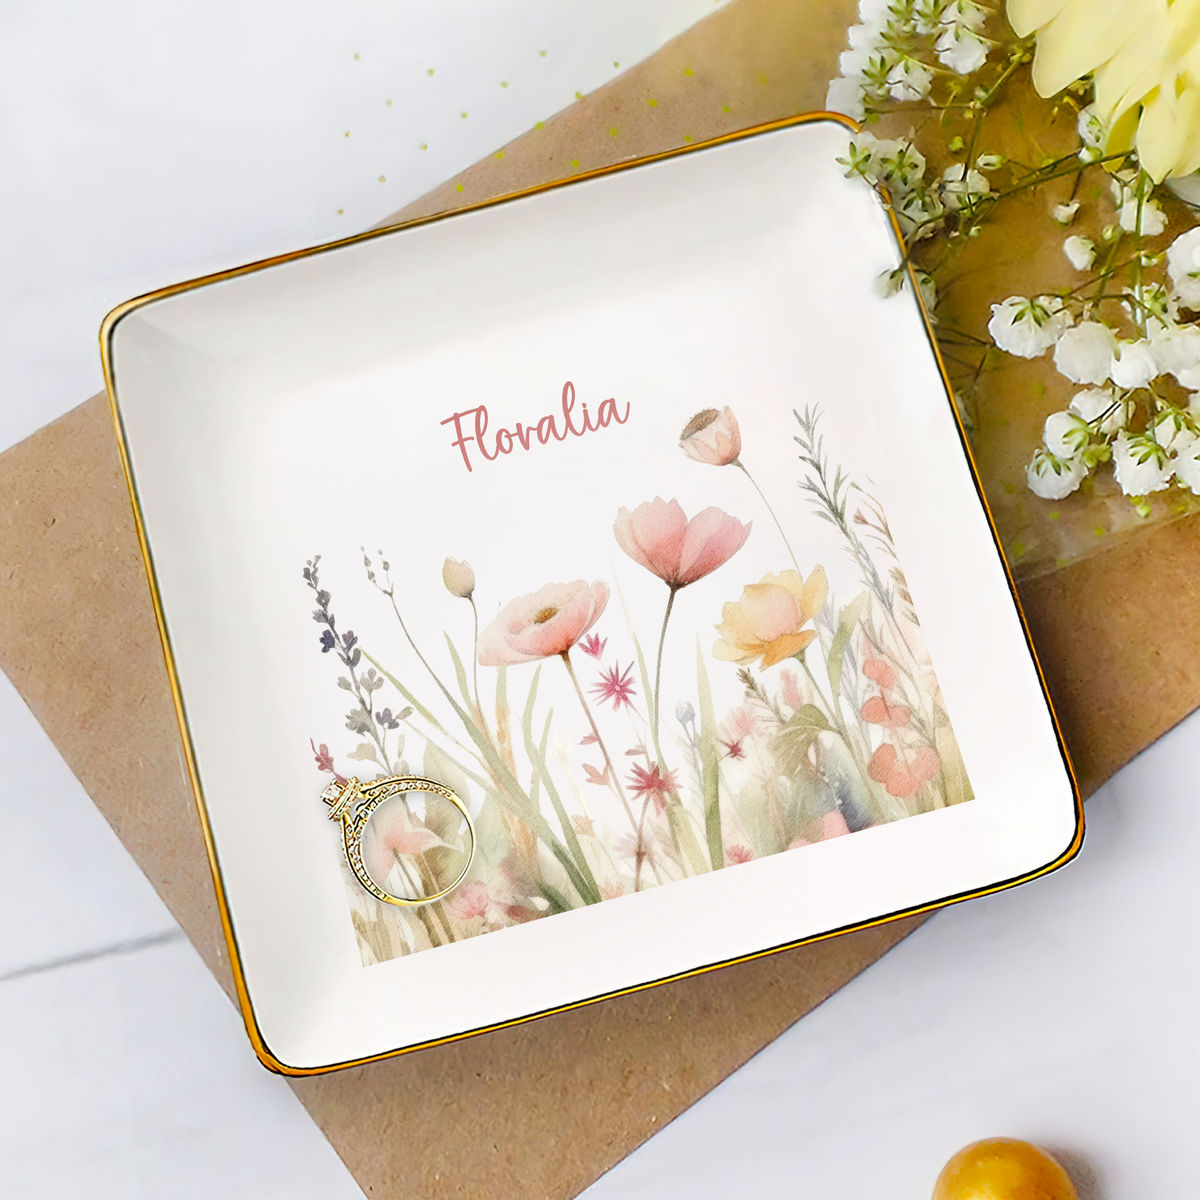 Personalized Jewelry Tray - Jewelry Tray - Custom Name, Bridesmaid Gifts, Birthday Gift for Her, Graduation Gift, Bridal Shower Gift, Gift for Mom